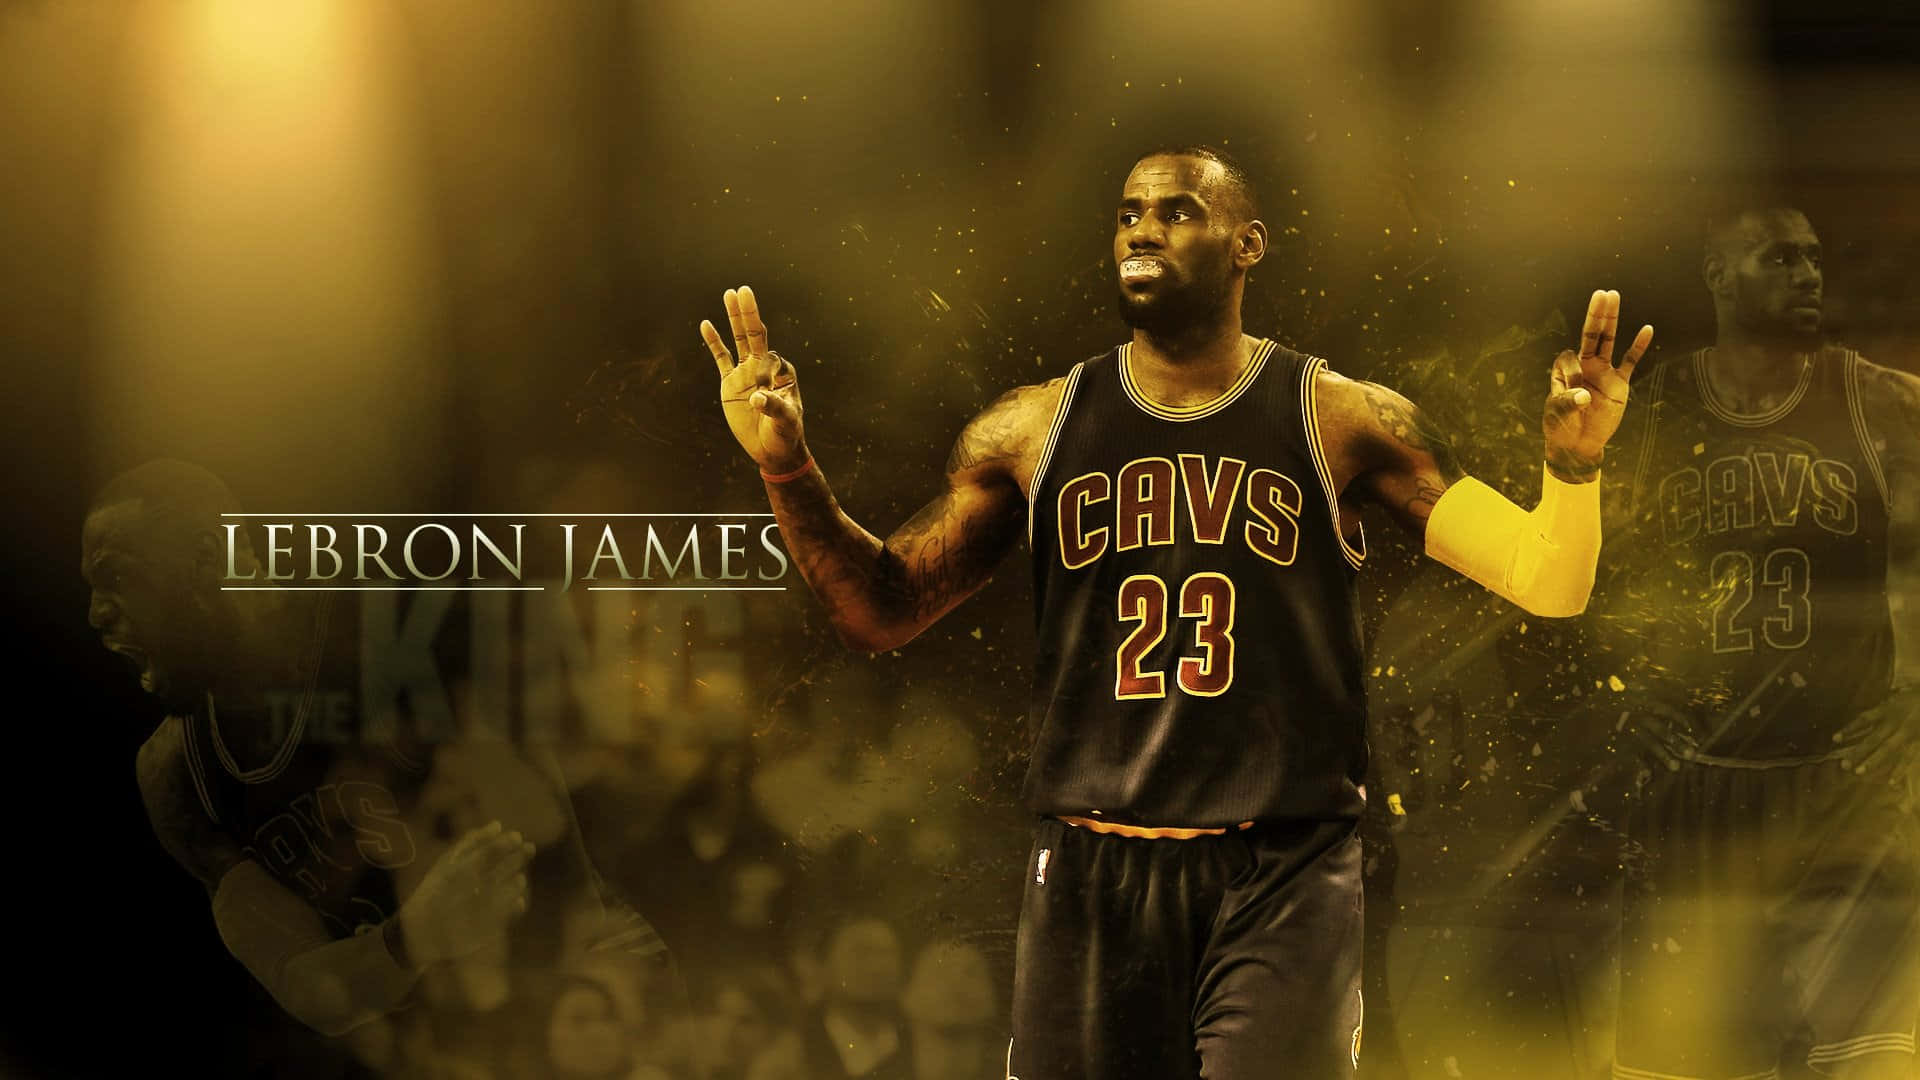 Image  "Iconic NBA Moments From the Greatest Era" Wallpaper